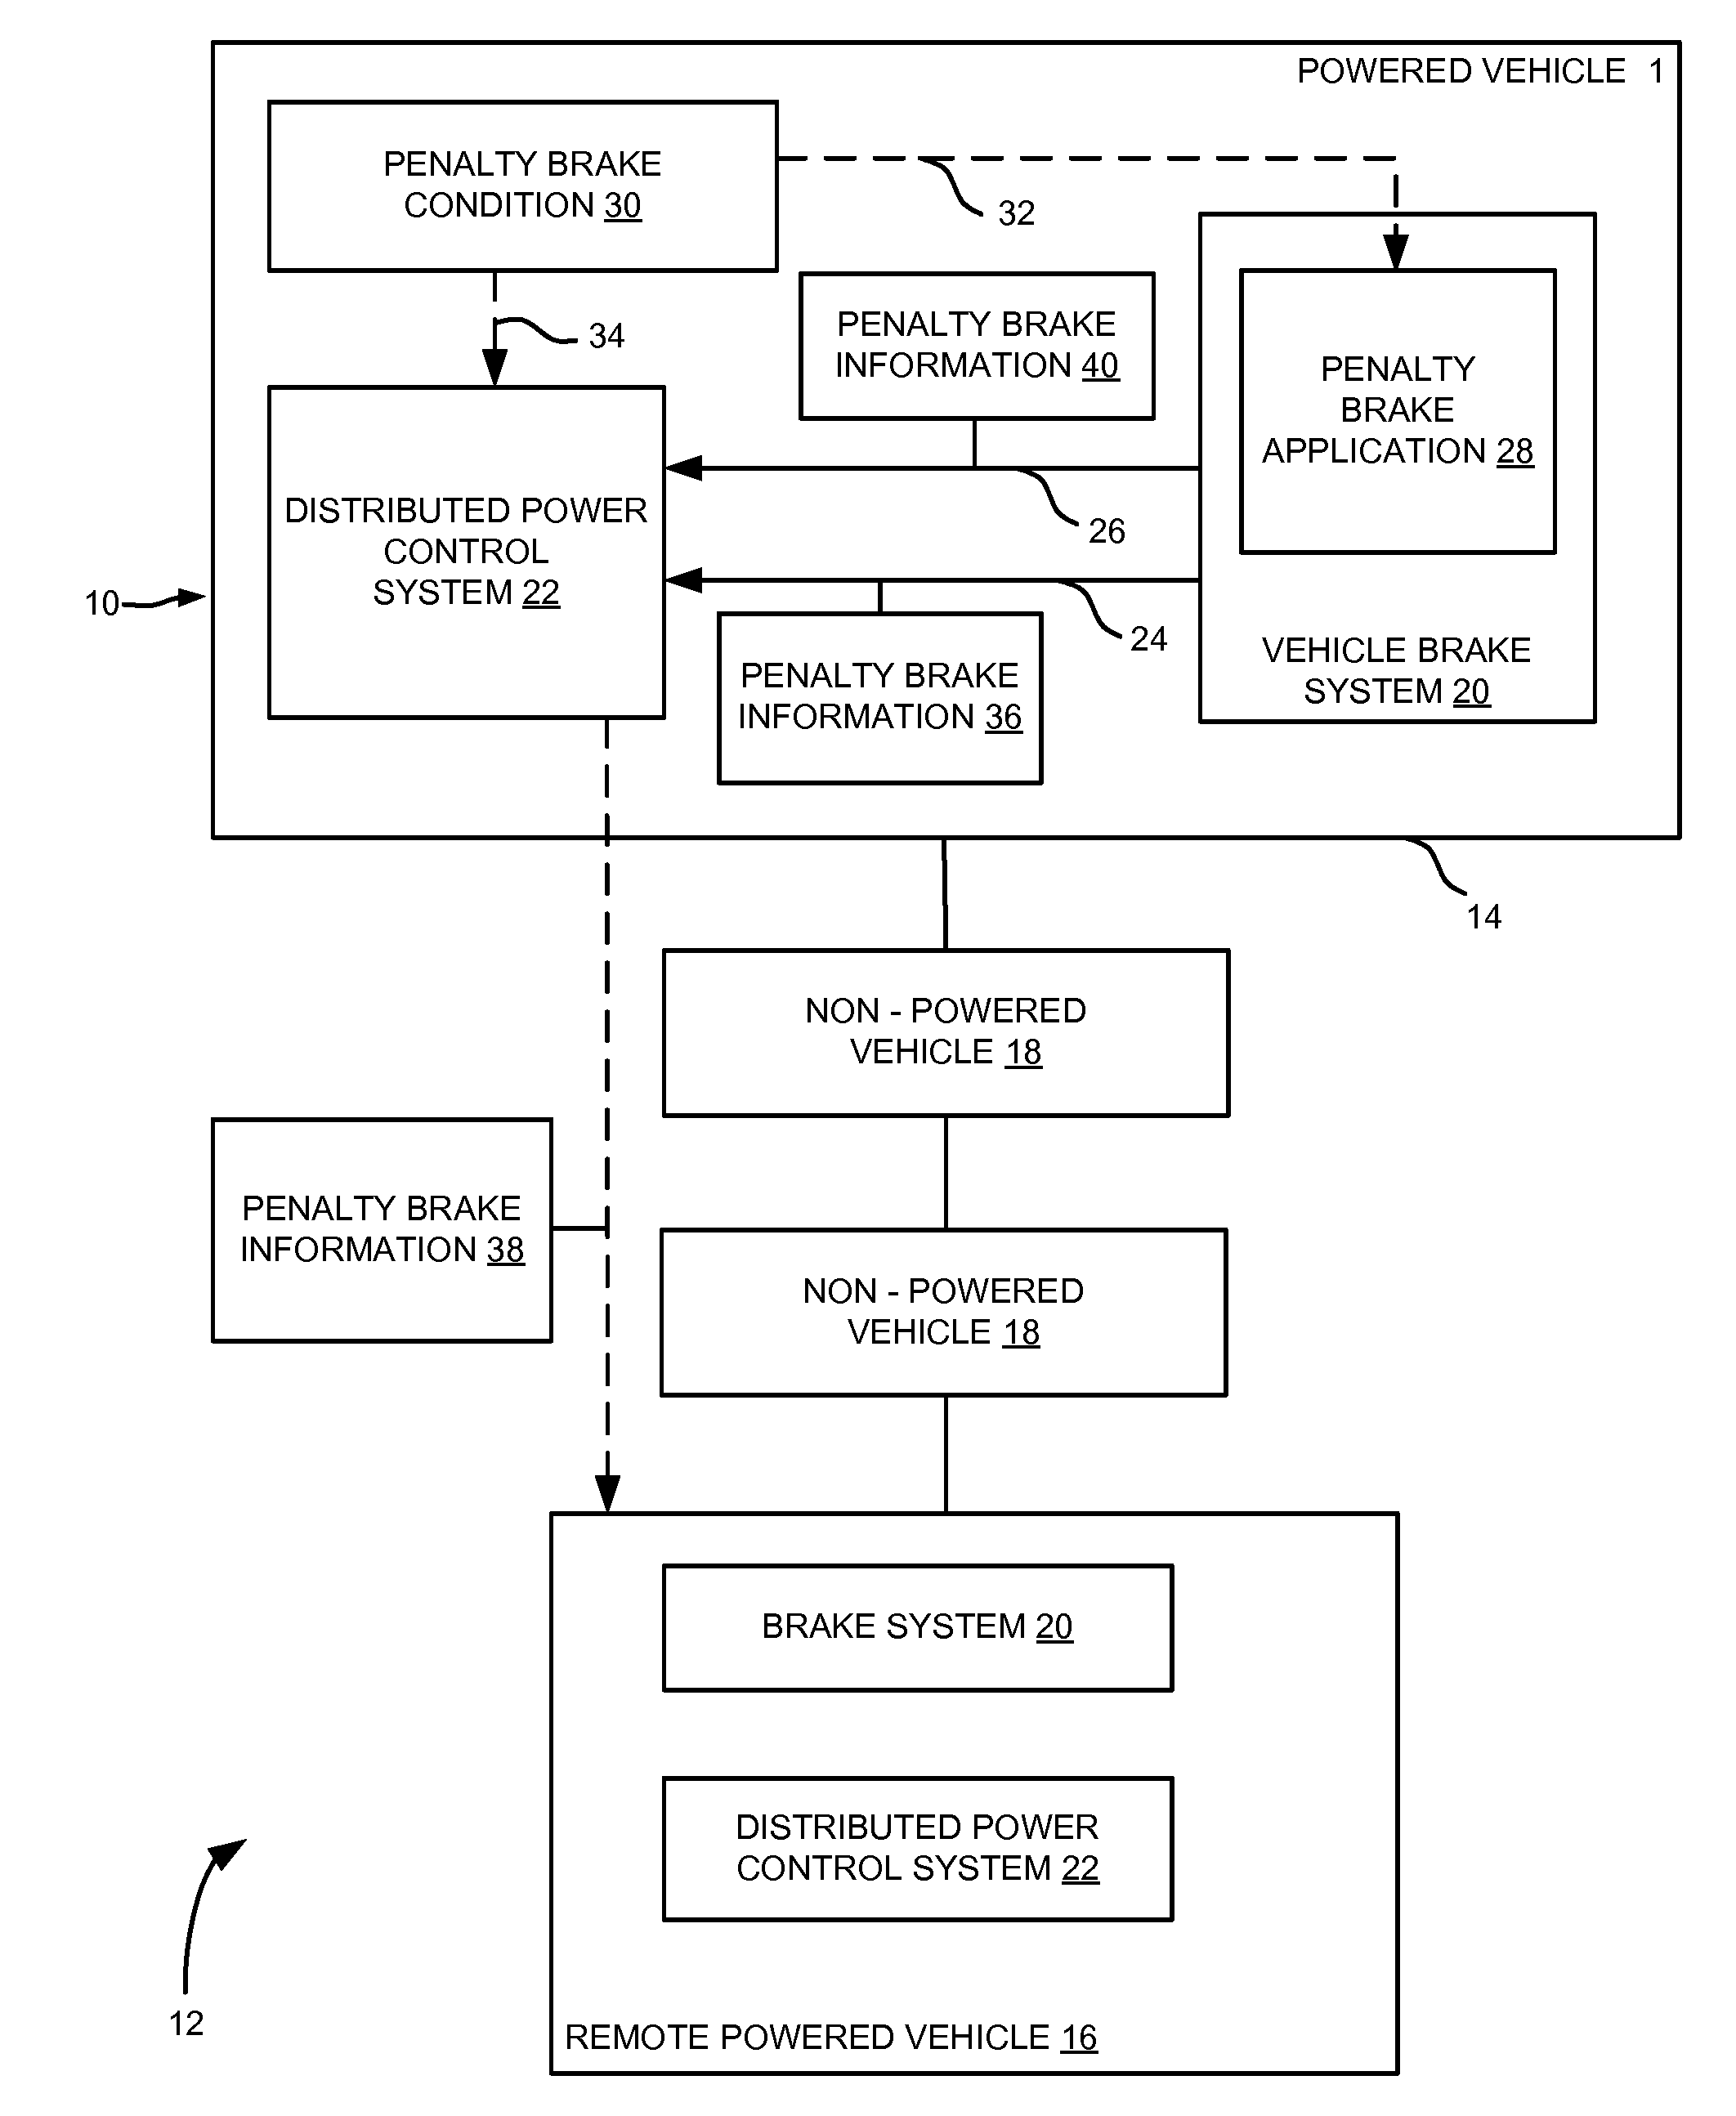 System and method for braking system control in distributed power vehicles